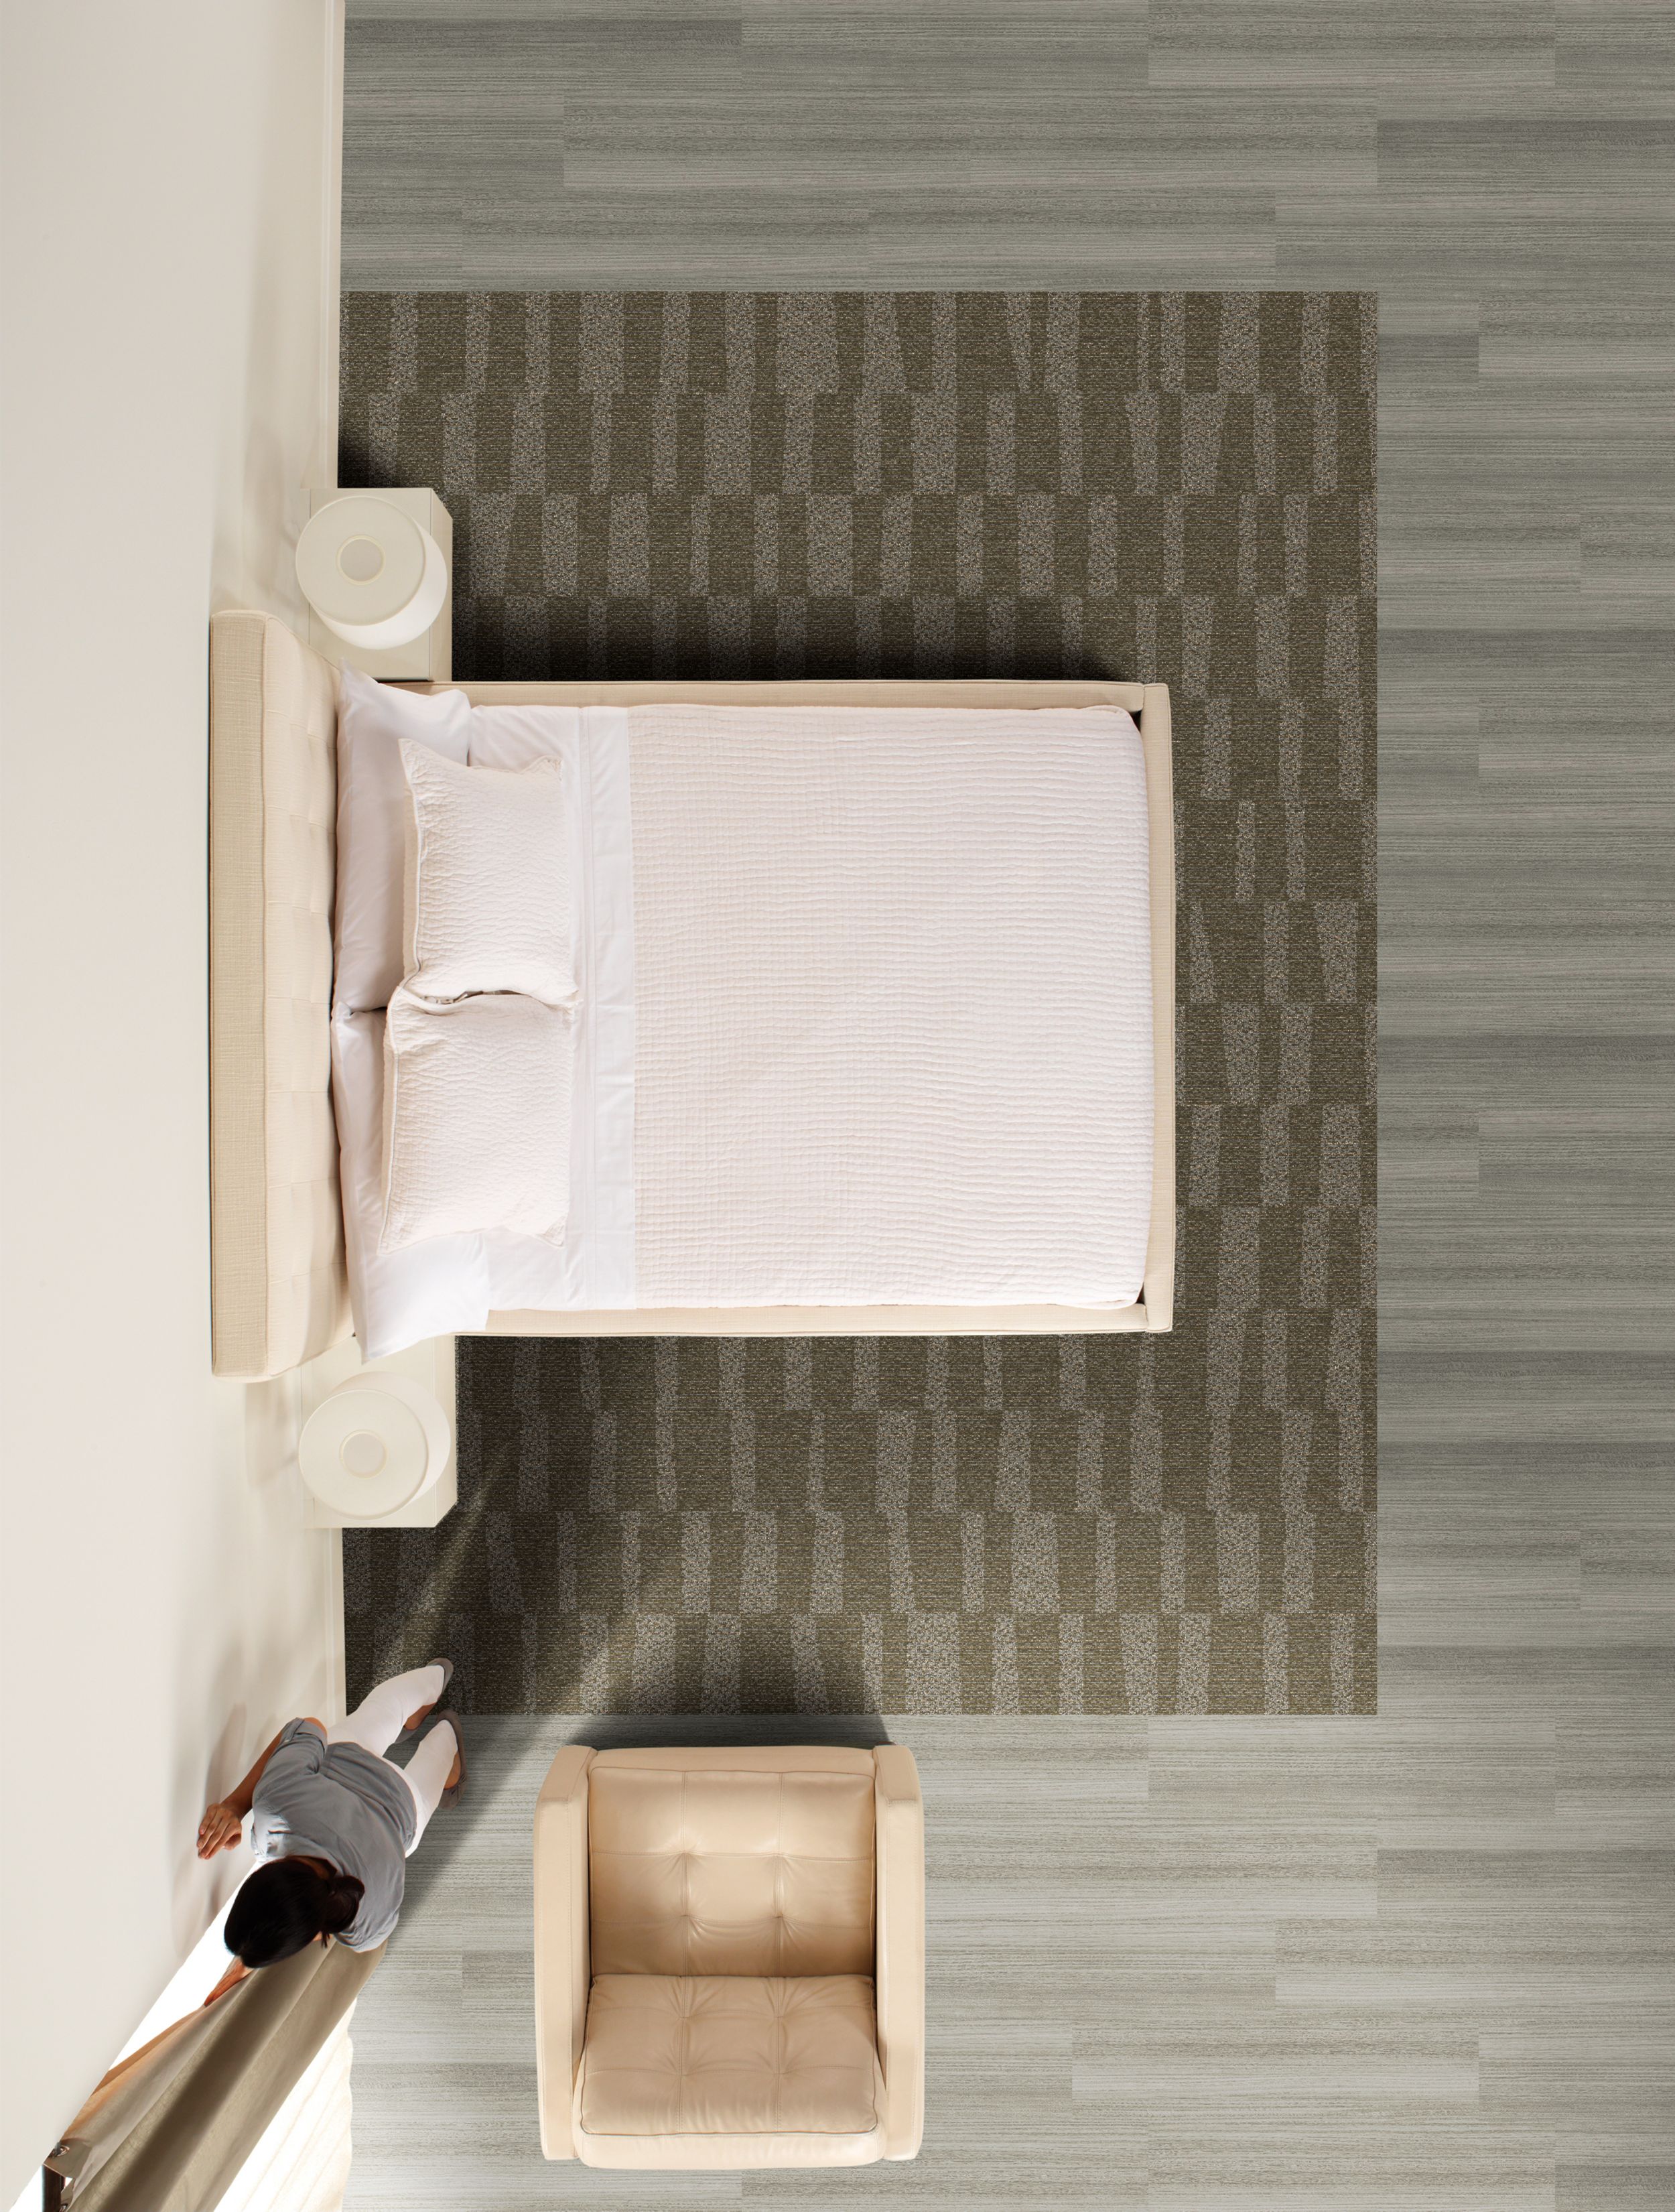 Interface RMS 706 plank carpet tile and Textured Woodgrains LVT in hotel guest room imagen número 7